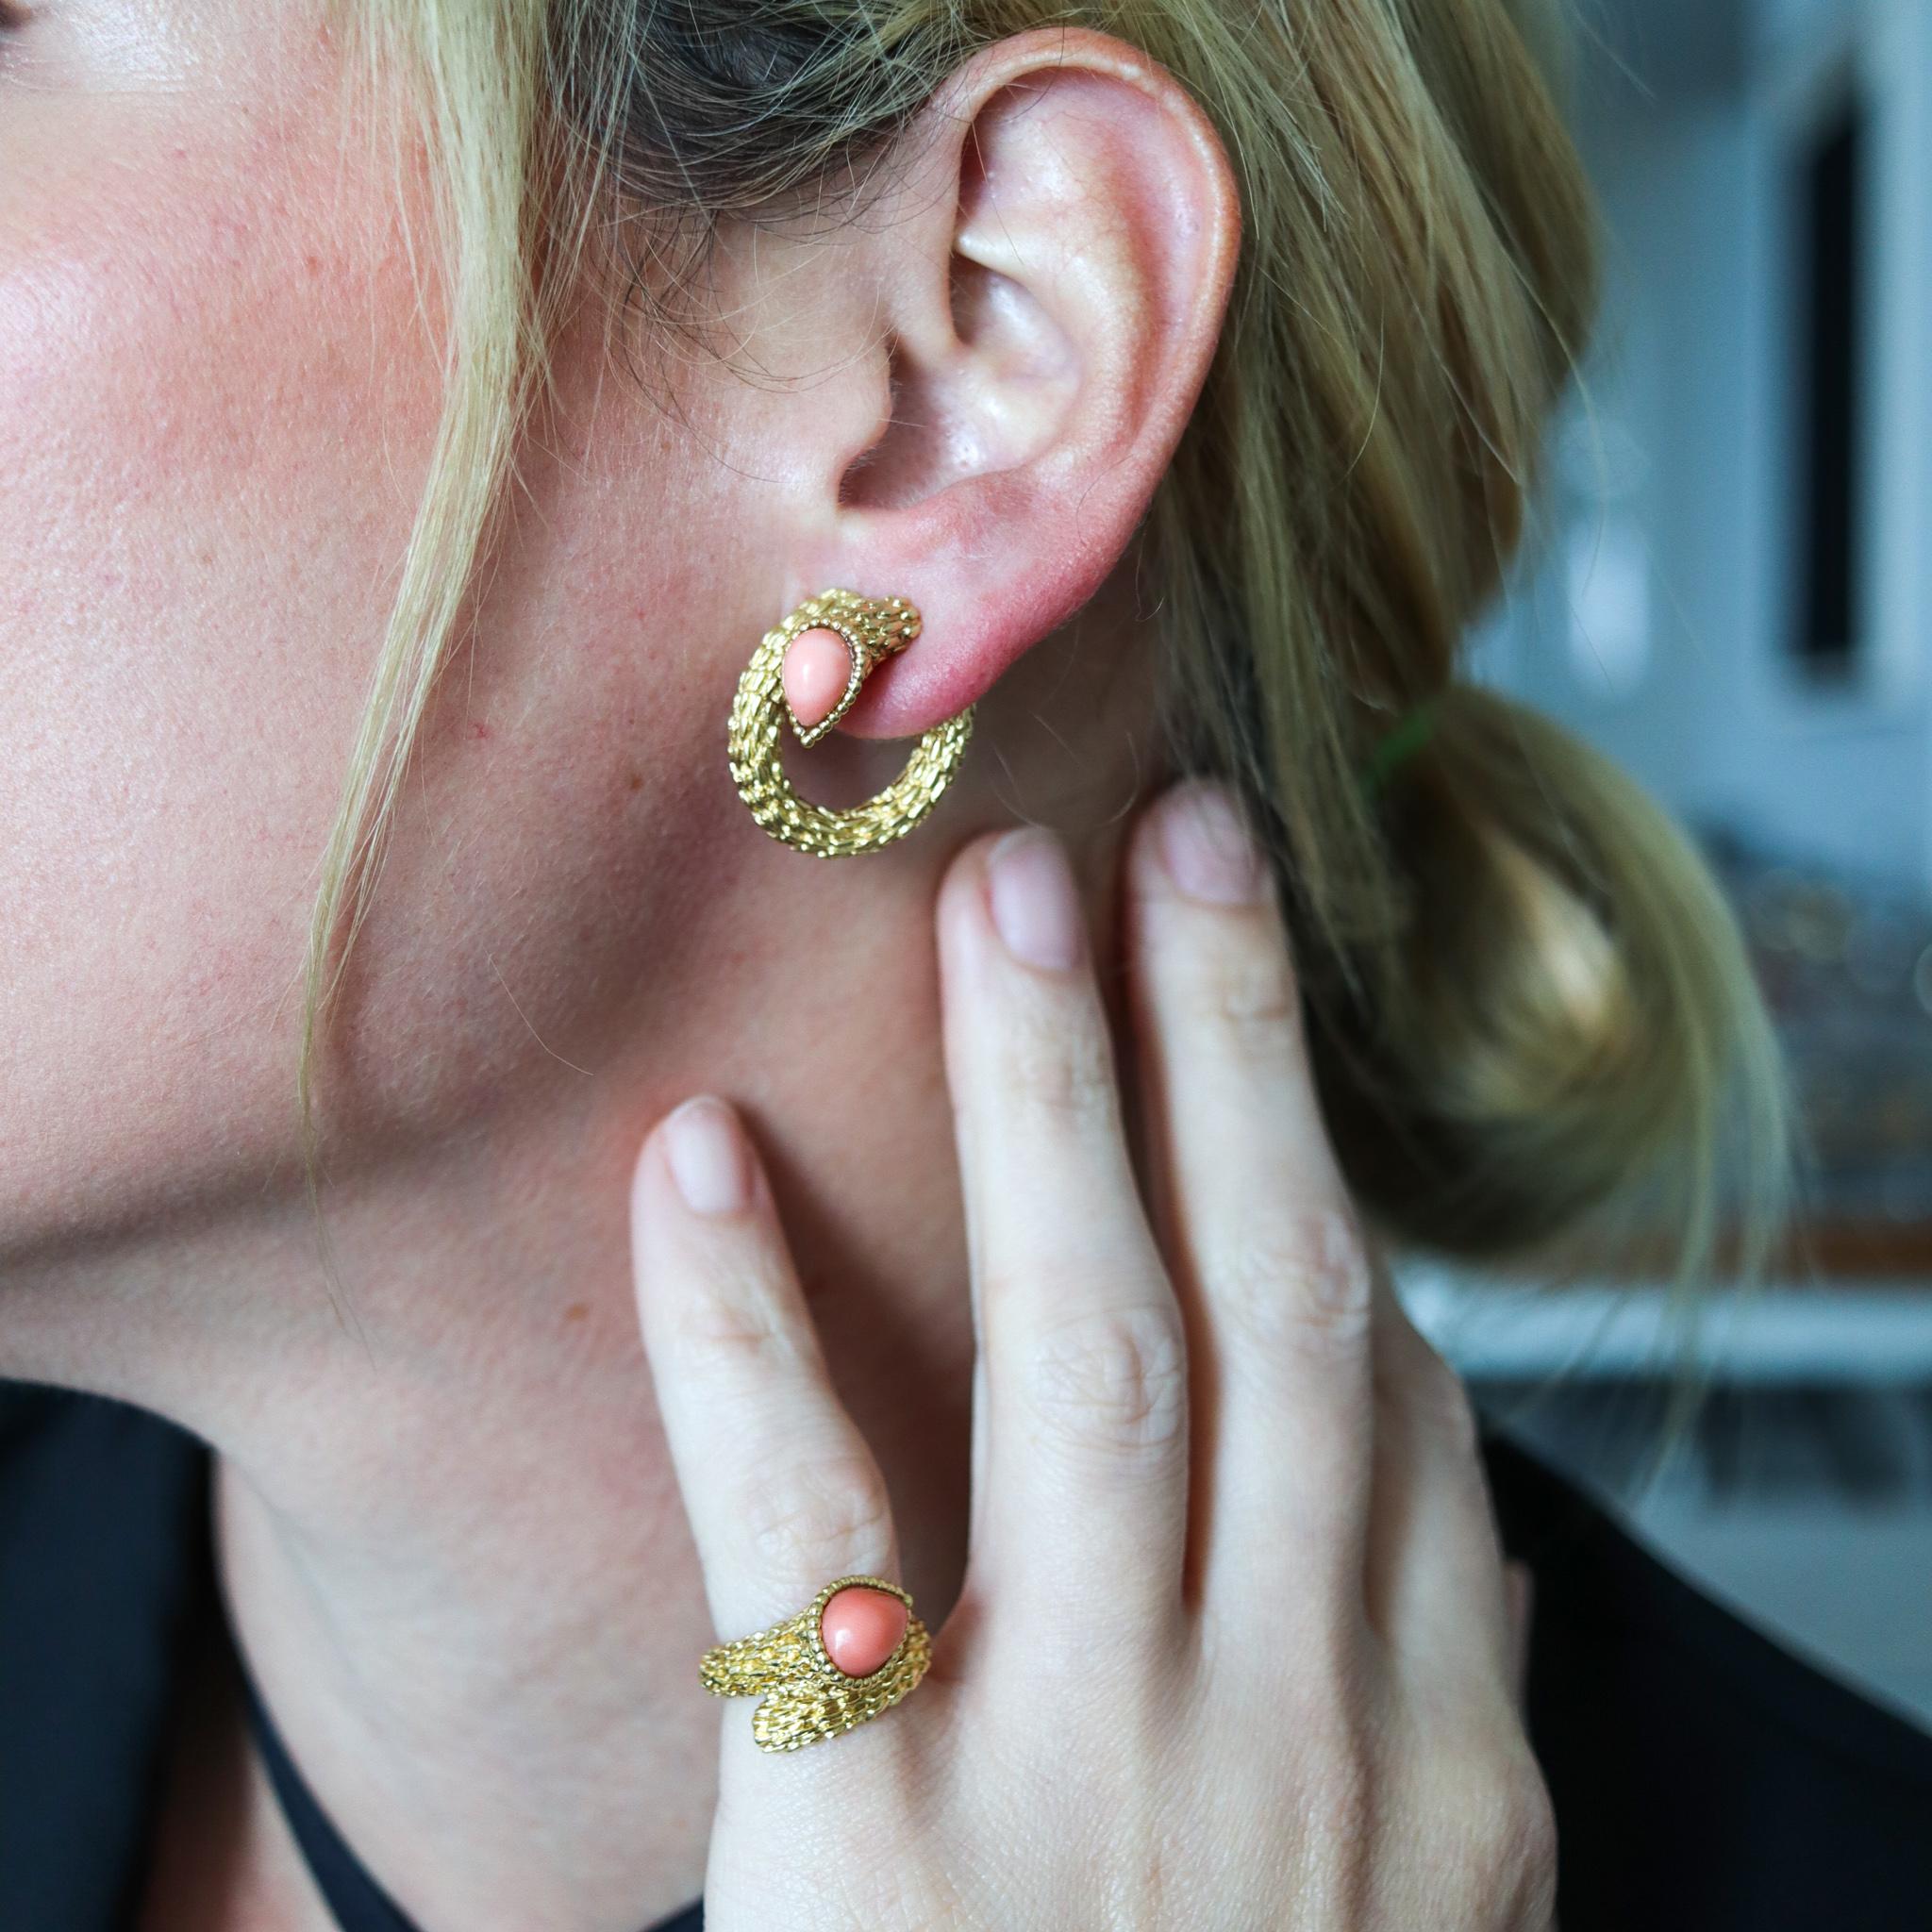 Serpent Boheme earrings designed by Boucheron.

This is one of the most iconic piece from the French jewelry house of Boucheron. This classic Serpent Boheme pair of earrings was carefully crafted at the atelier of Andre Vassort back in the 1970 in